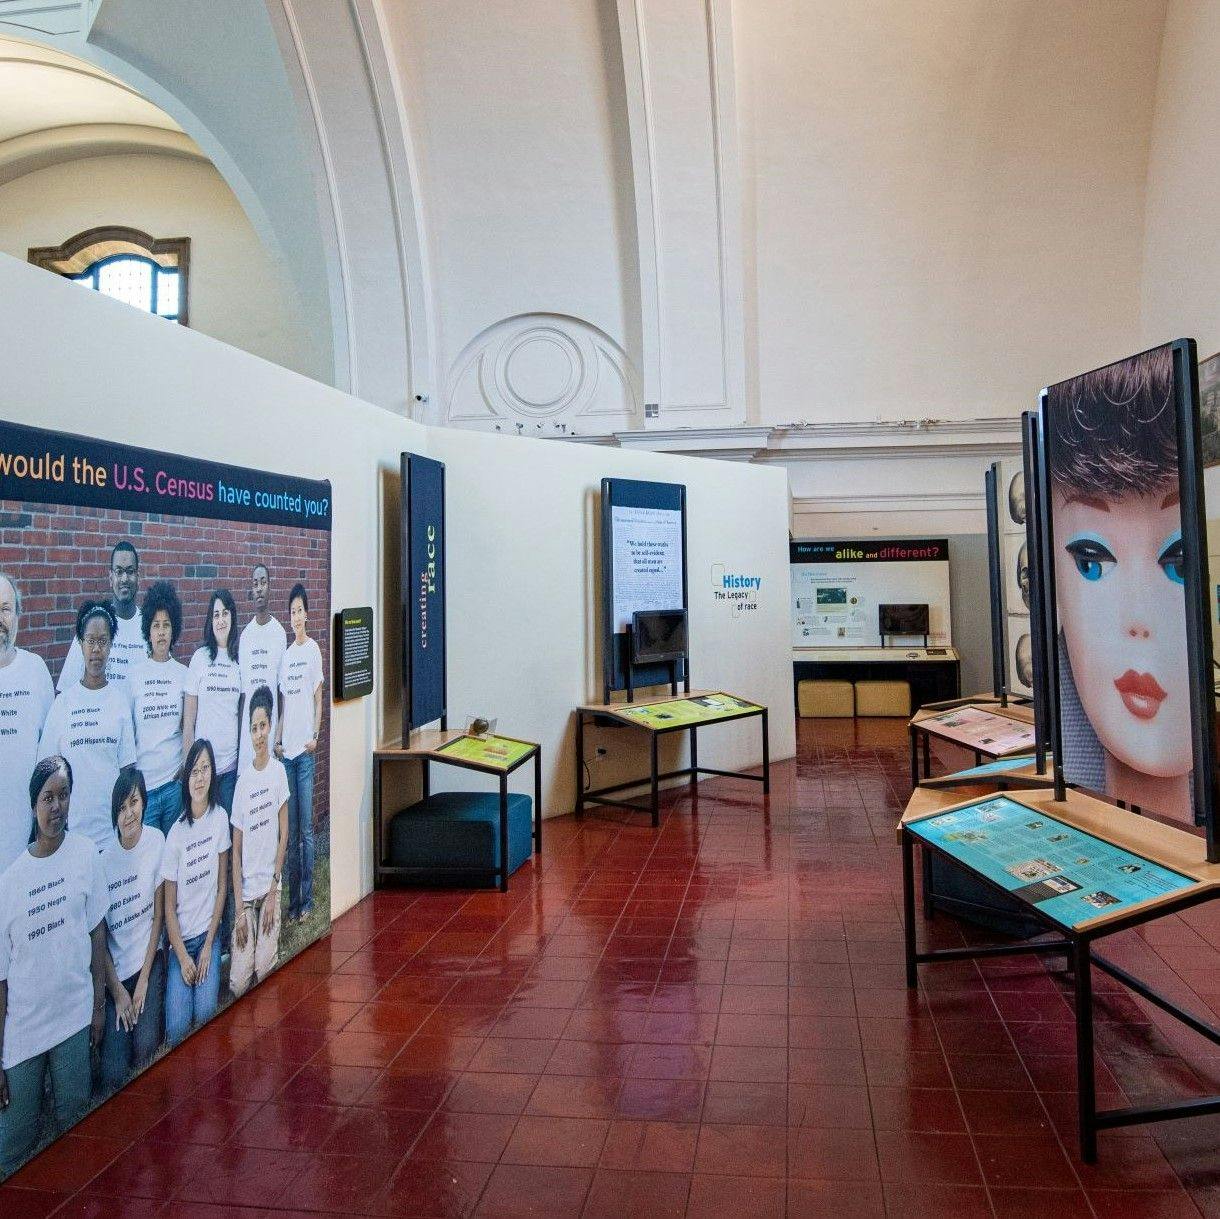 An image inside the "Race: Are We So Different?" exhibit featuring a life-sized group portraits of diverse people on the left, and various tables and museum signage, one depicting a large image of a white children's doll, on the right.